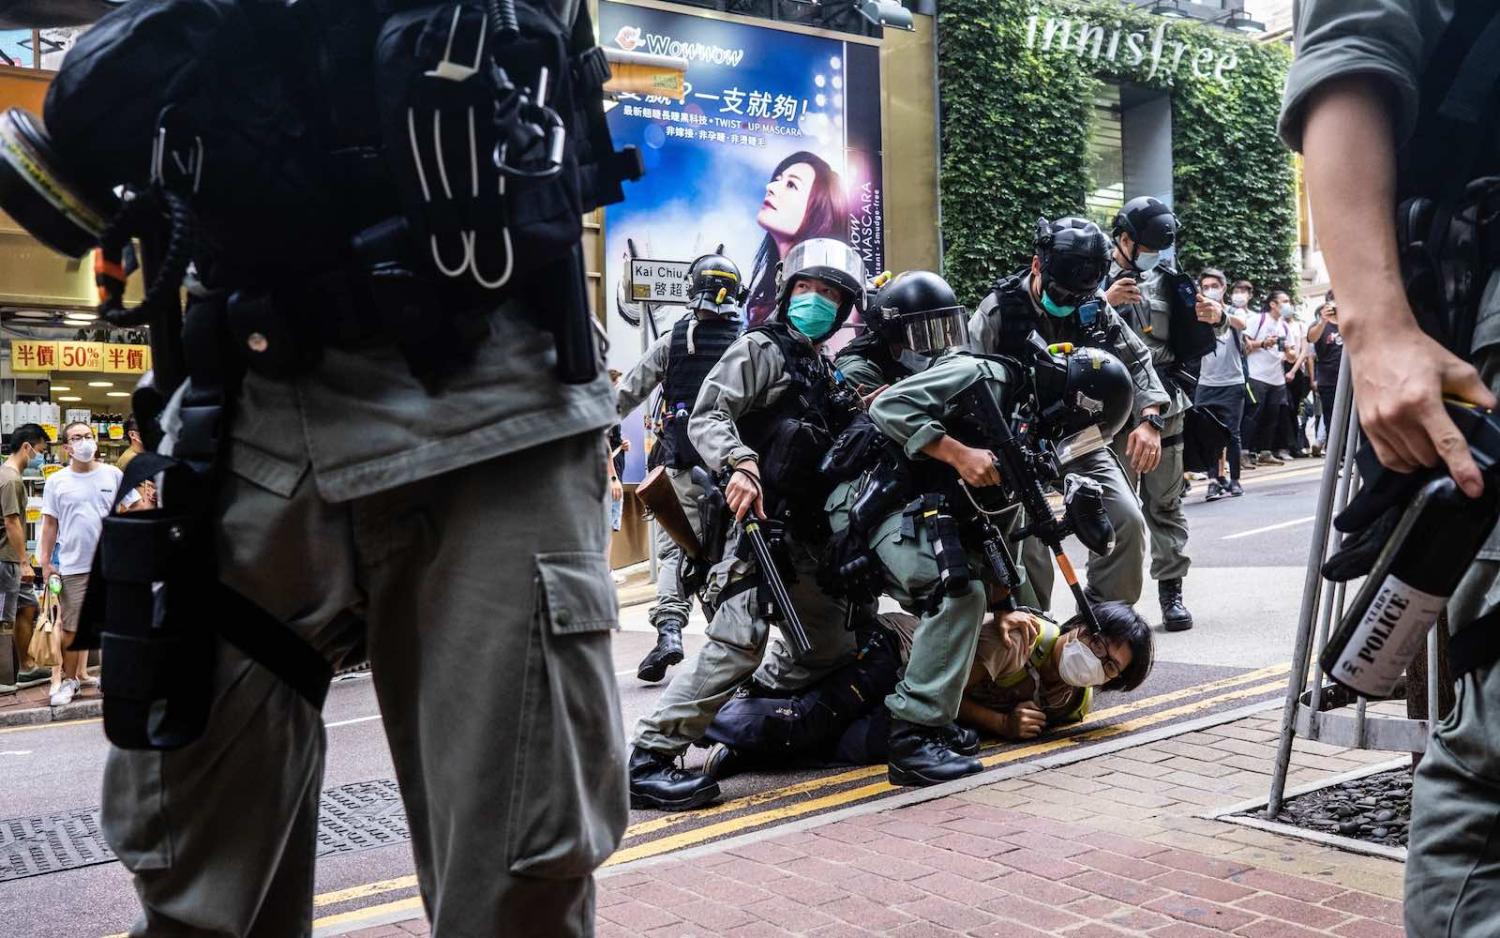 Riot police pin down a protester during a demonstration after the passage of a new security law in Hong Kong, 1 July 2020 (Willie Siau/SOPA Images/LightRocket via Getty Images)